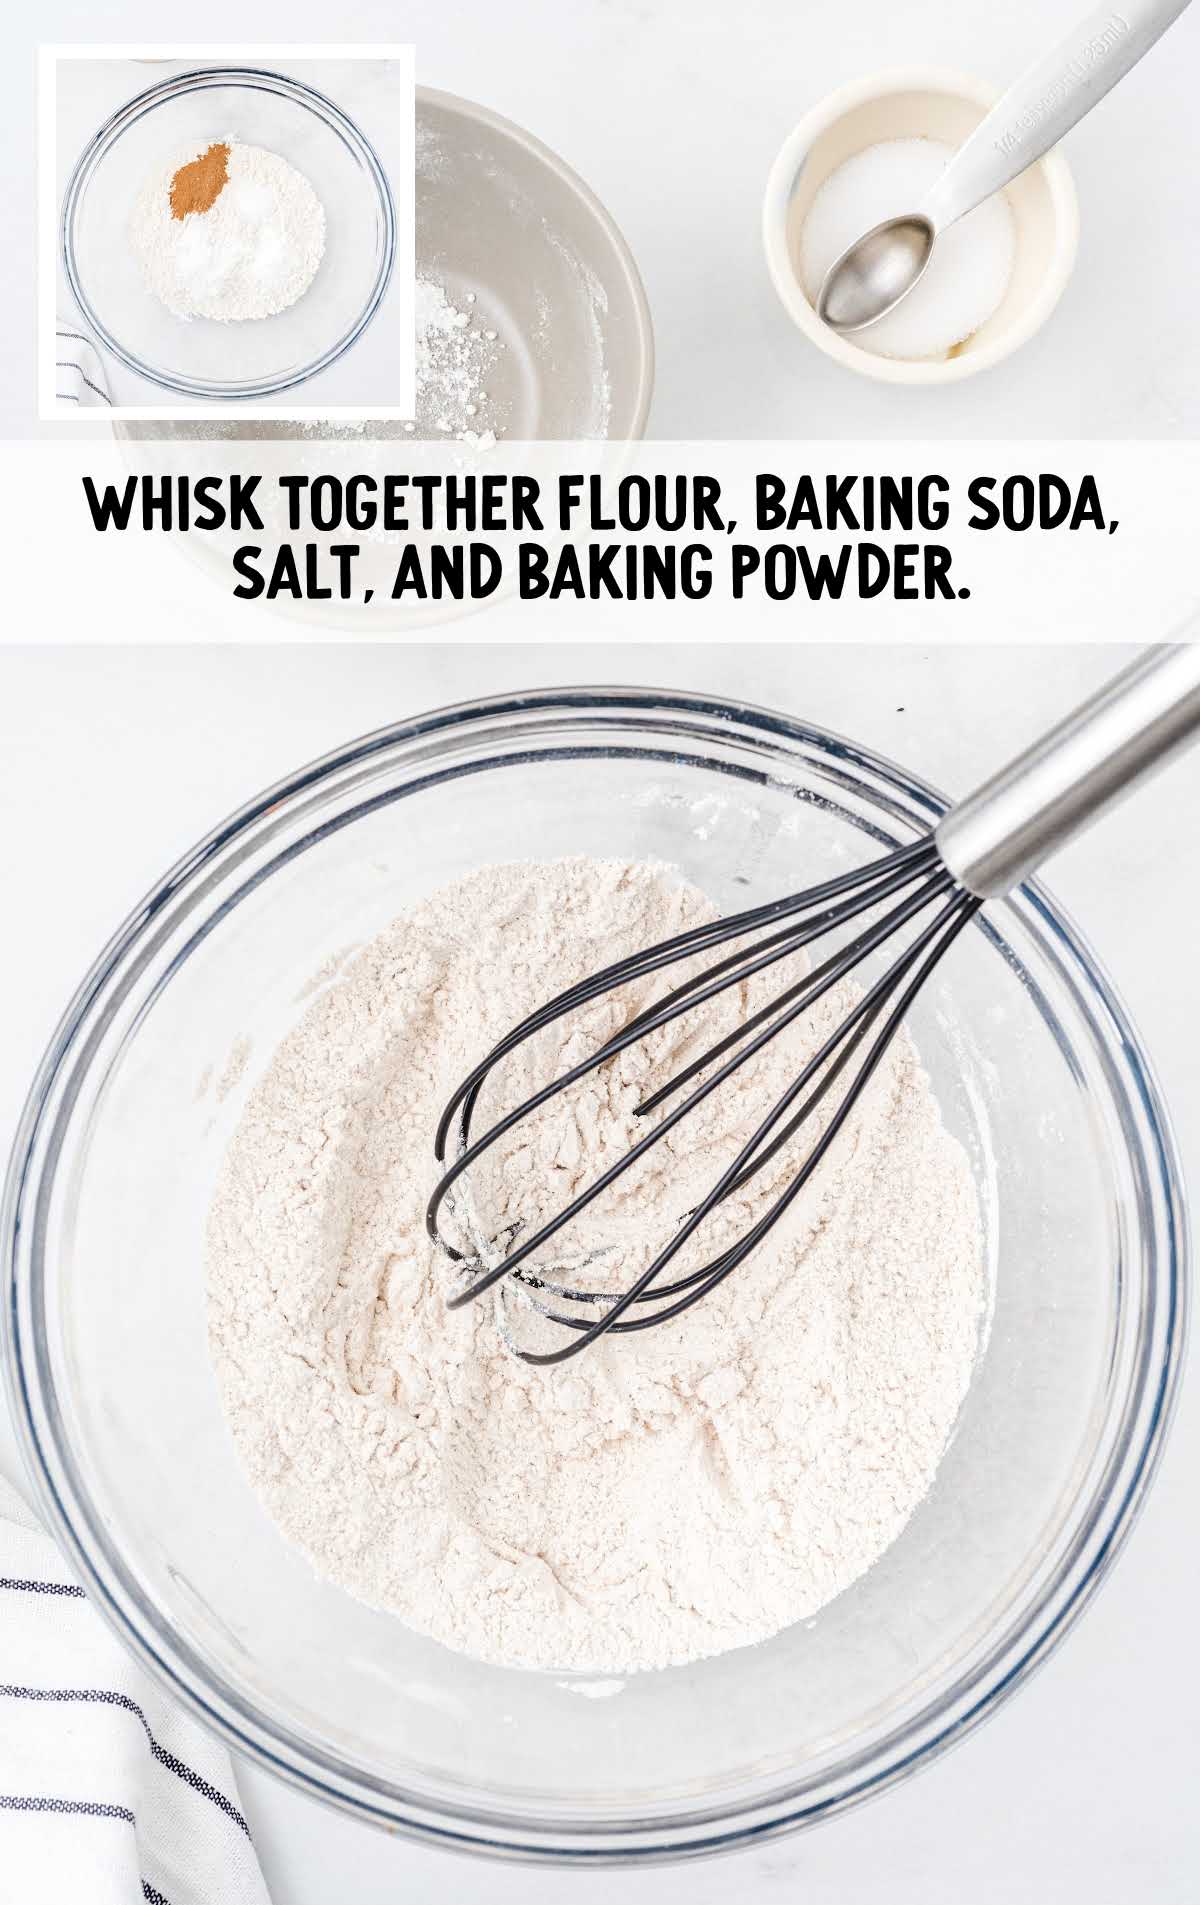 flour, baking soda, salt, and baking powder in a bowl being whisked together